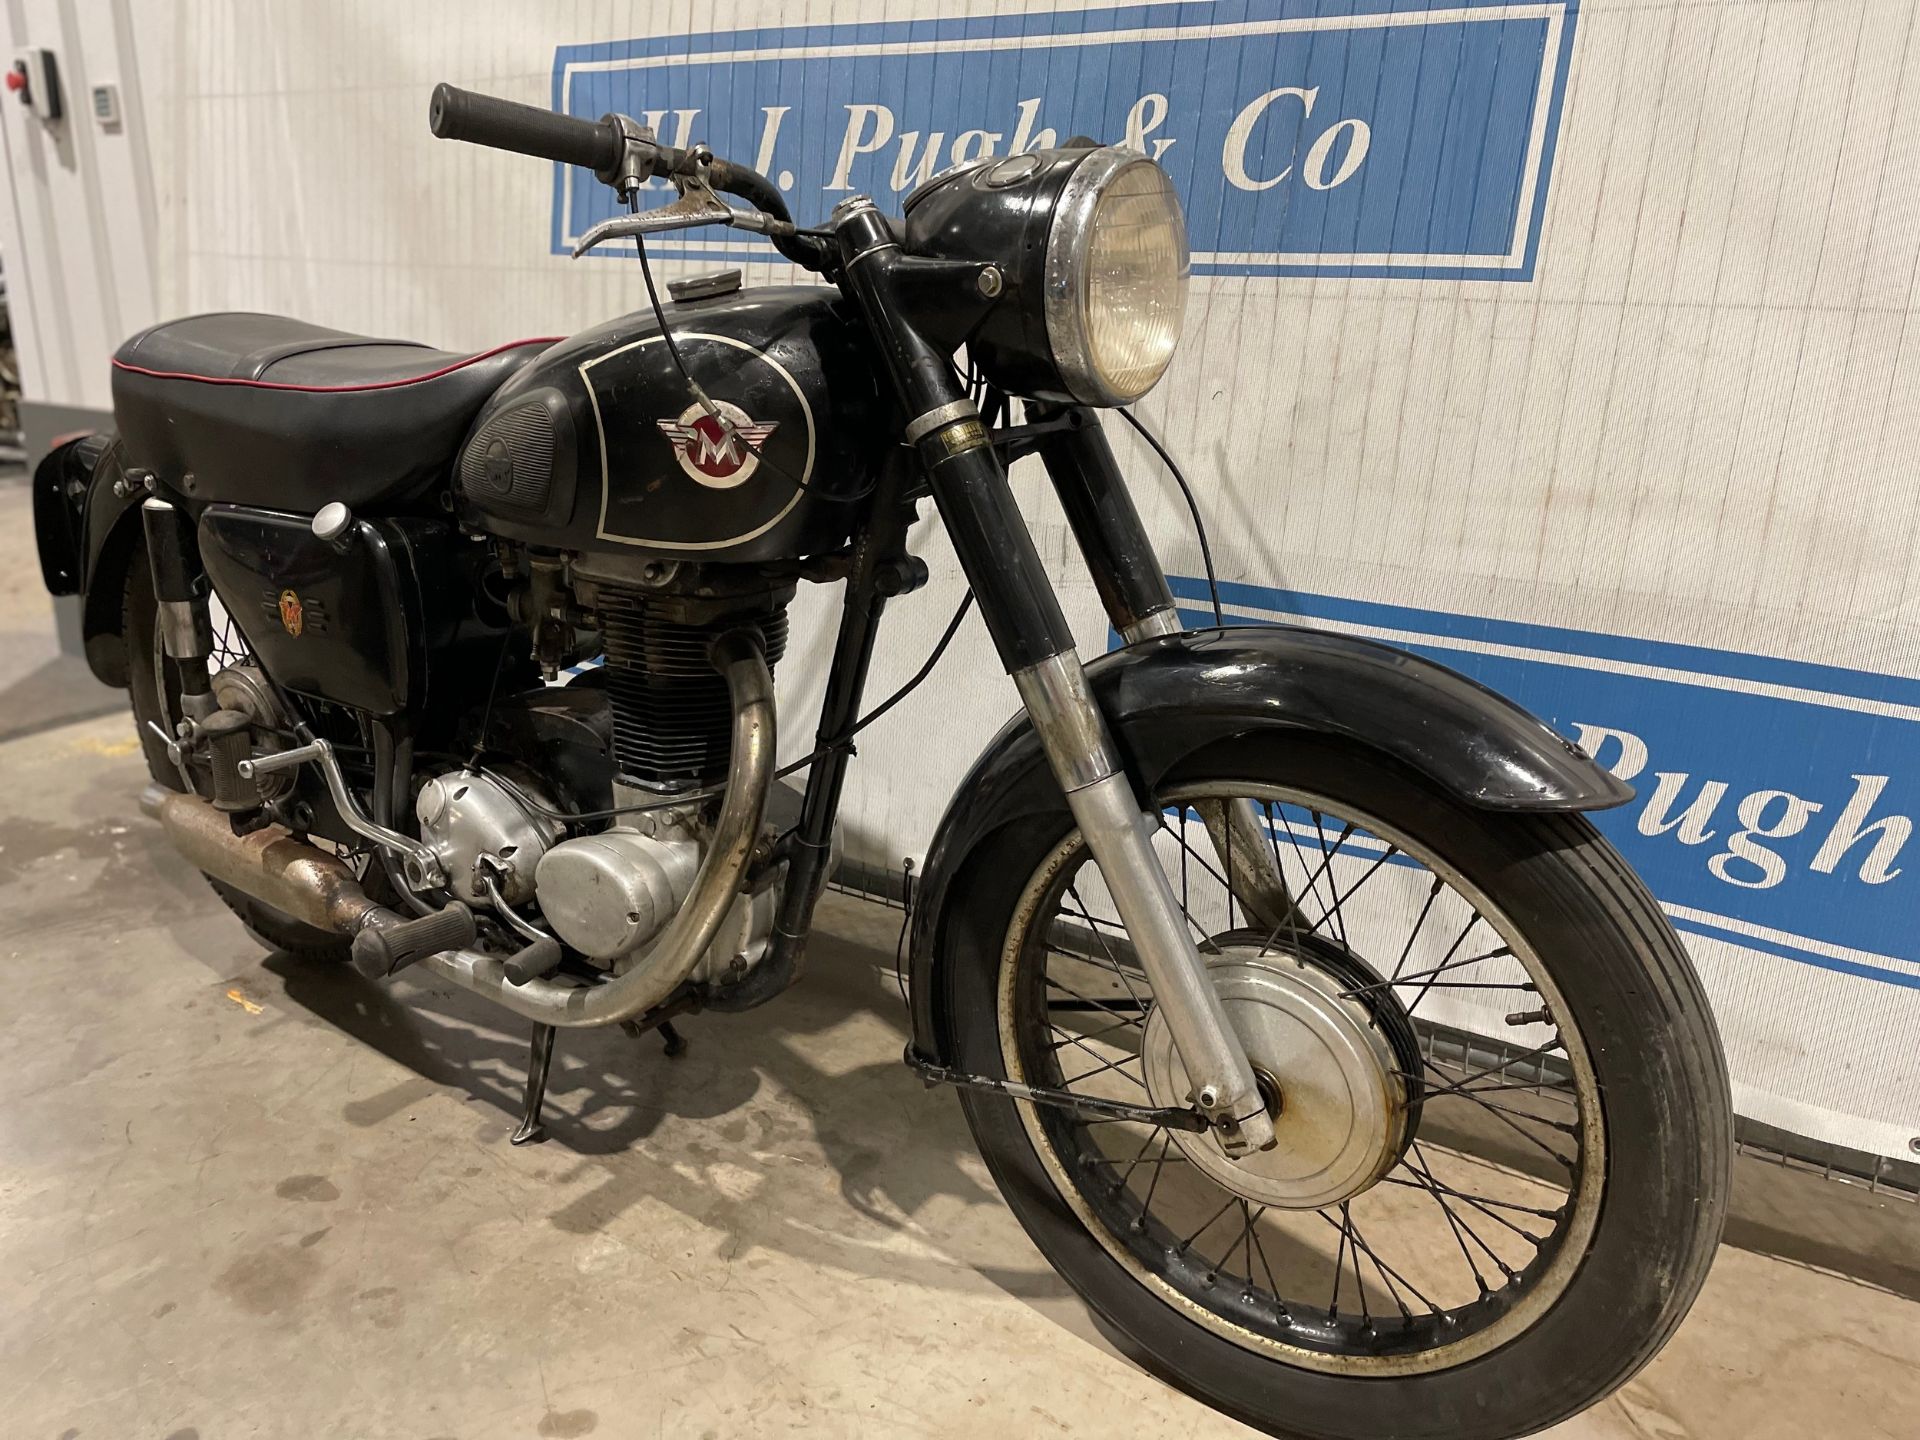 Matchless G3 motorcycle. 1958. 348cc. Has run recently but needs a new clutch. Reg 660 XVU. V5 - Image 3 of 12